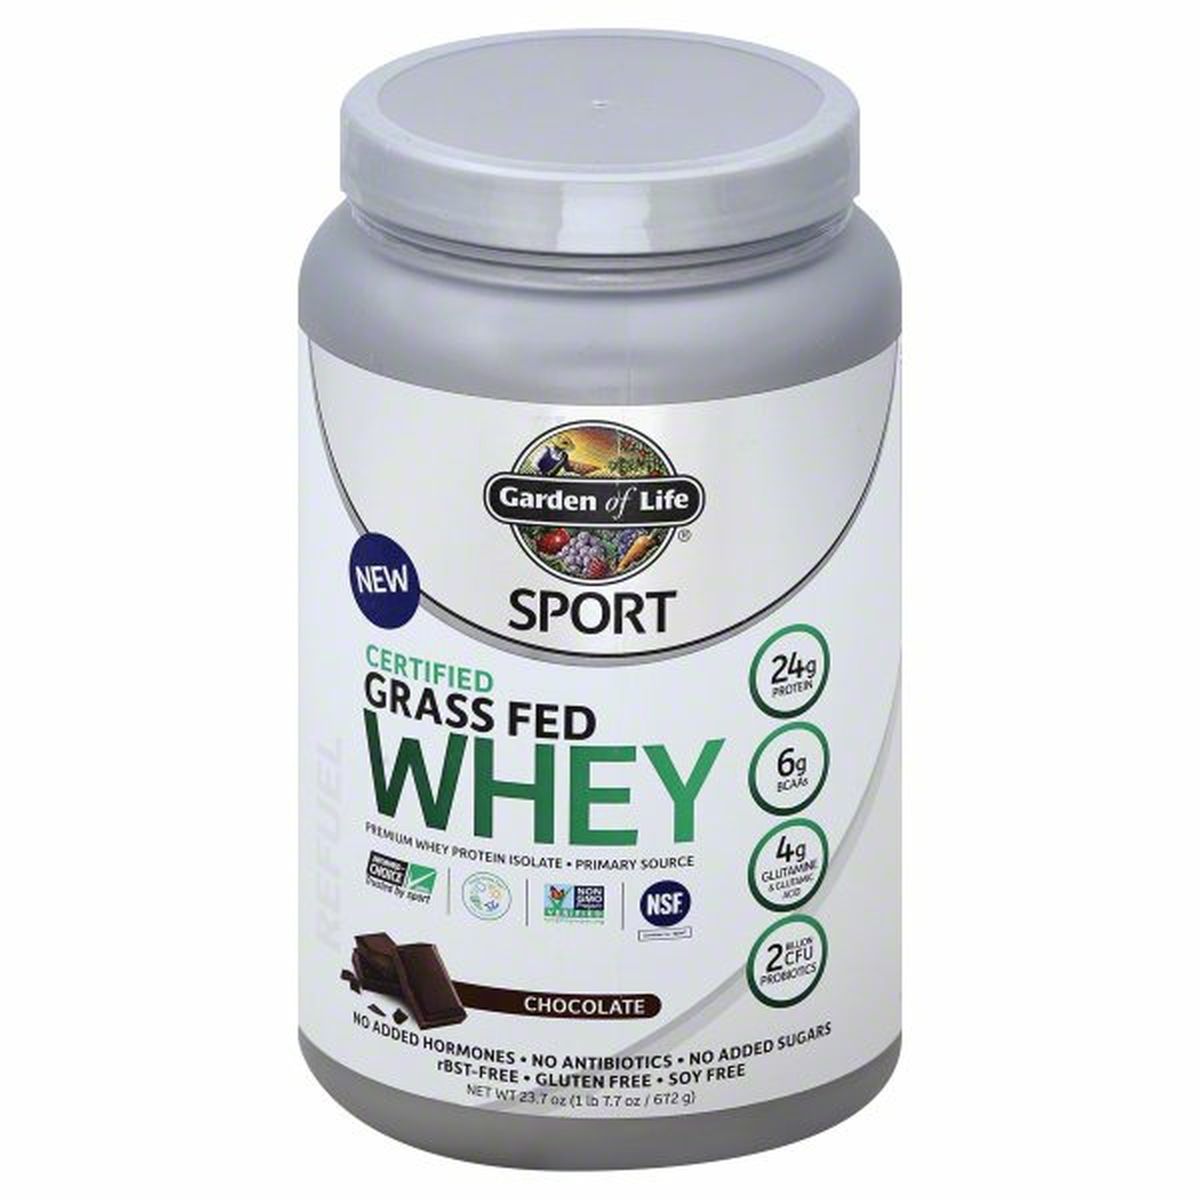 Calories in Garden of Life Sport Whey, Certified Grass Fed, Chocolate